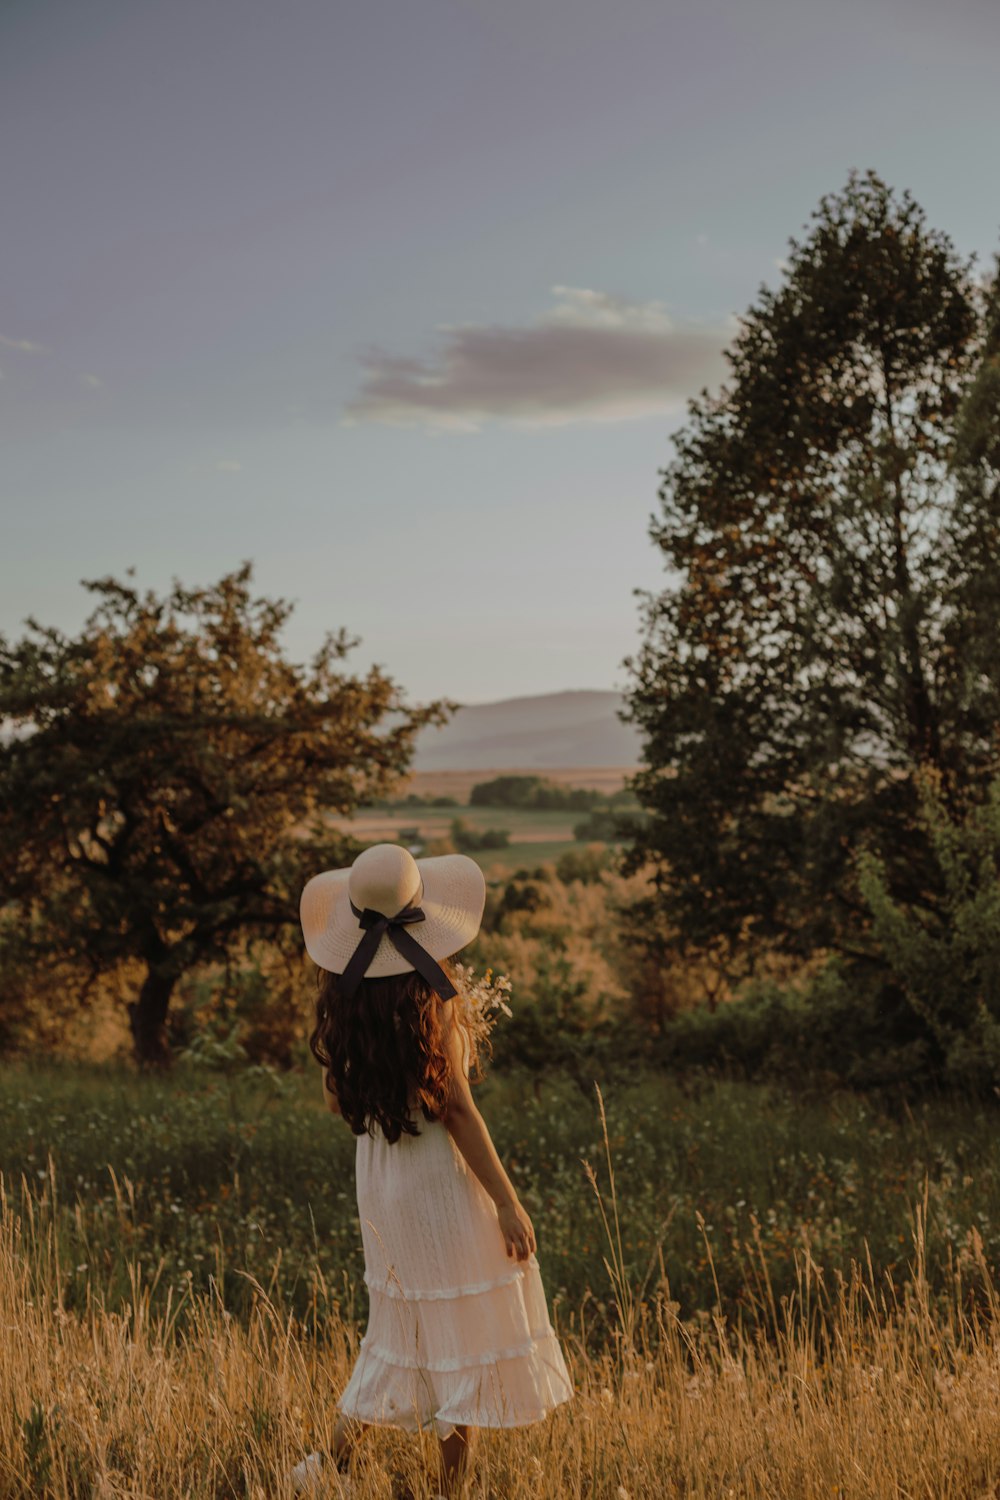 a little girl in a white dress and hat standing in a field